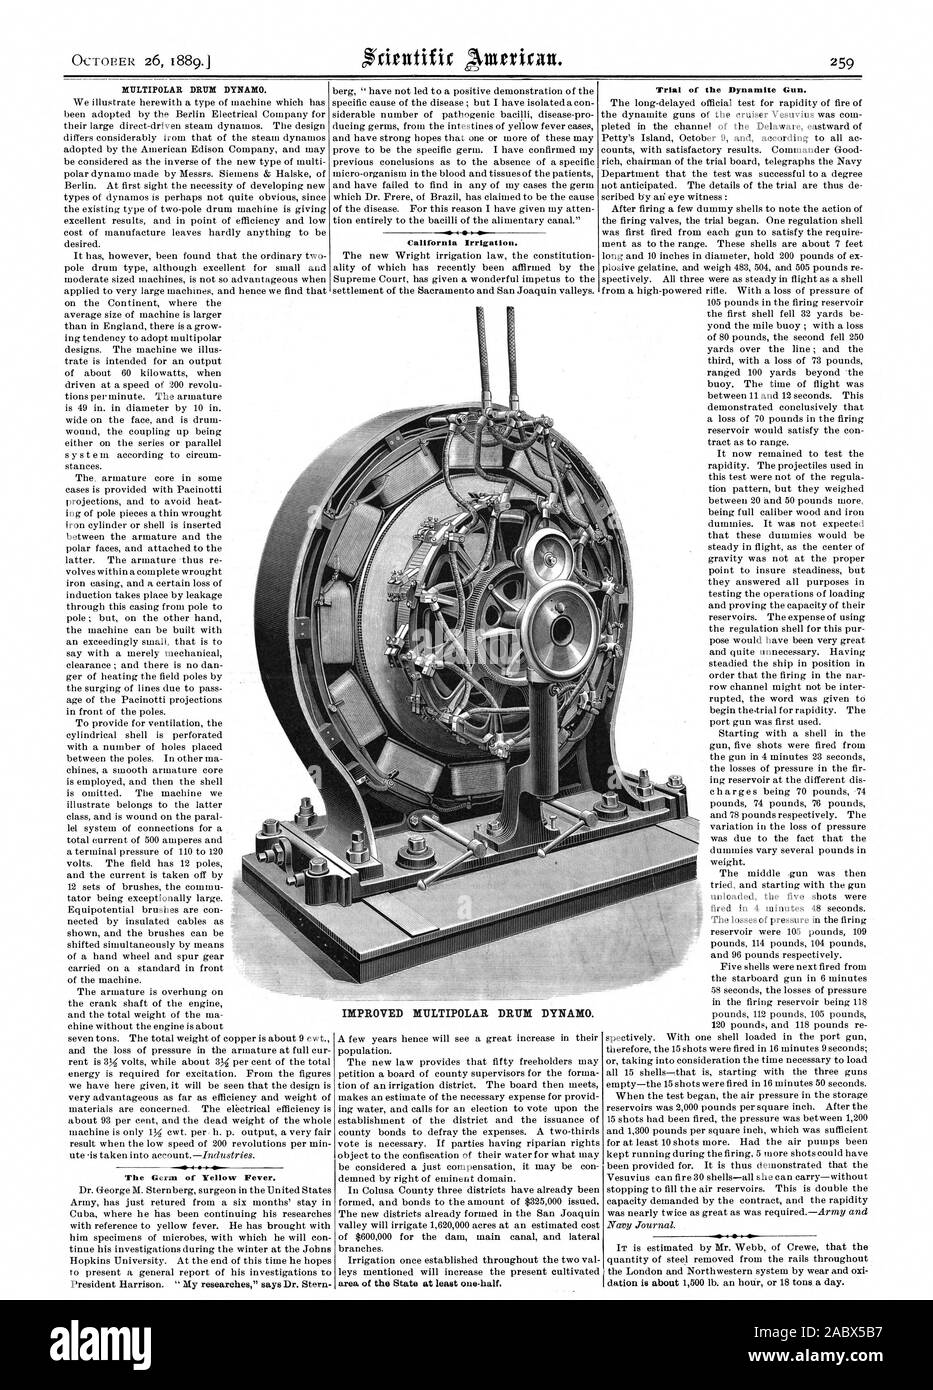 OCTOBER 26 1889. MULTIPOLAR DRUM DYNAMO. 4 The Germ of Yellow Fever. California Irrigation. Trial of the Dynamite Gun. IMPROVED MULTIPOLAR DRUM DYNAMO., scientific american, 1889-10-26 Stock Photo